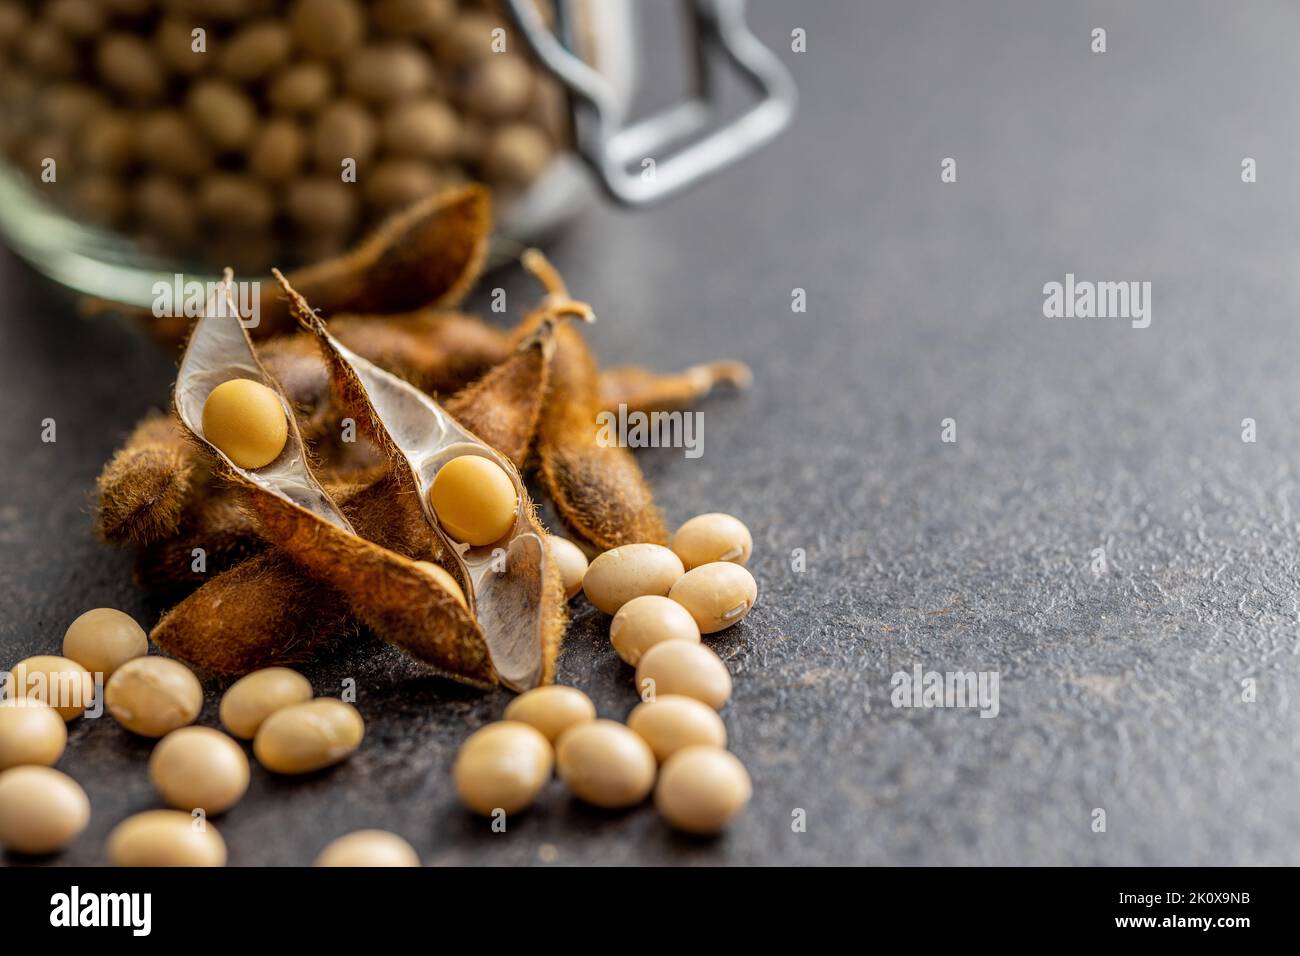 Soy beans. Dried soybean pod on the black table. Stock Photo